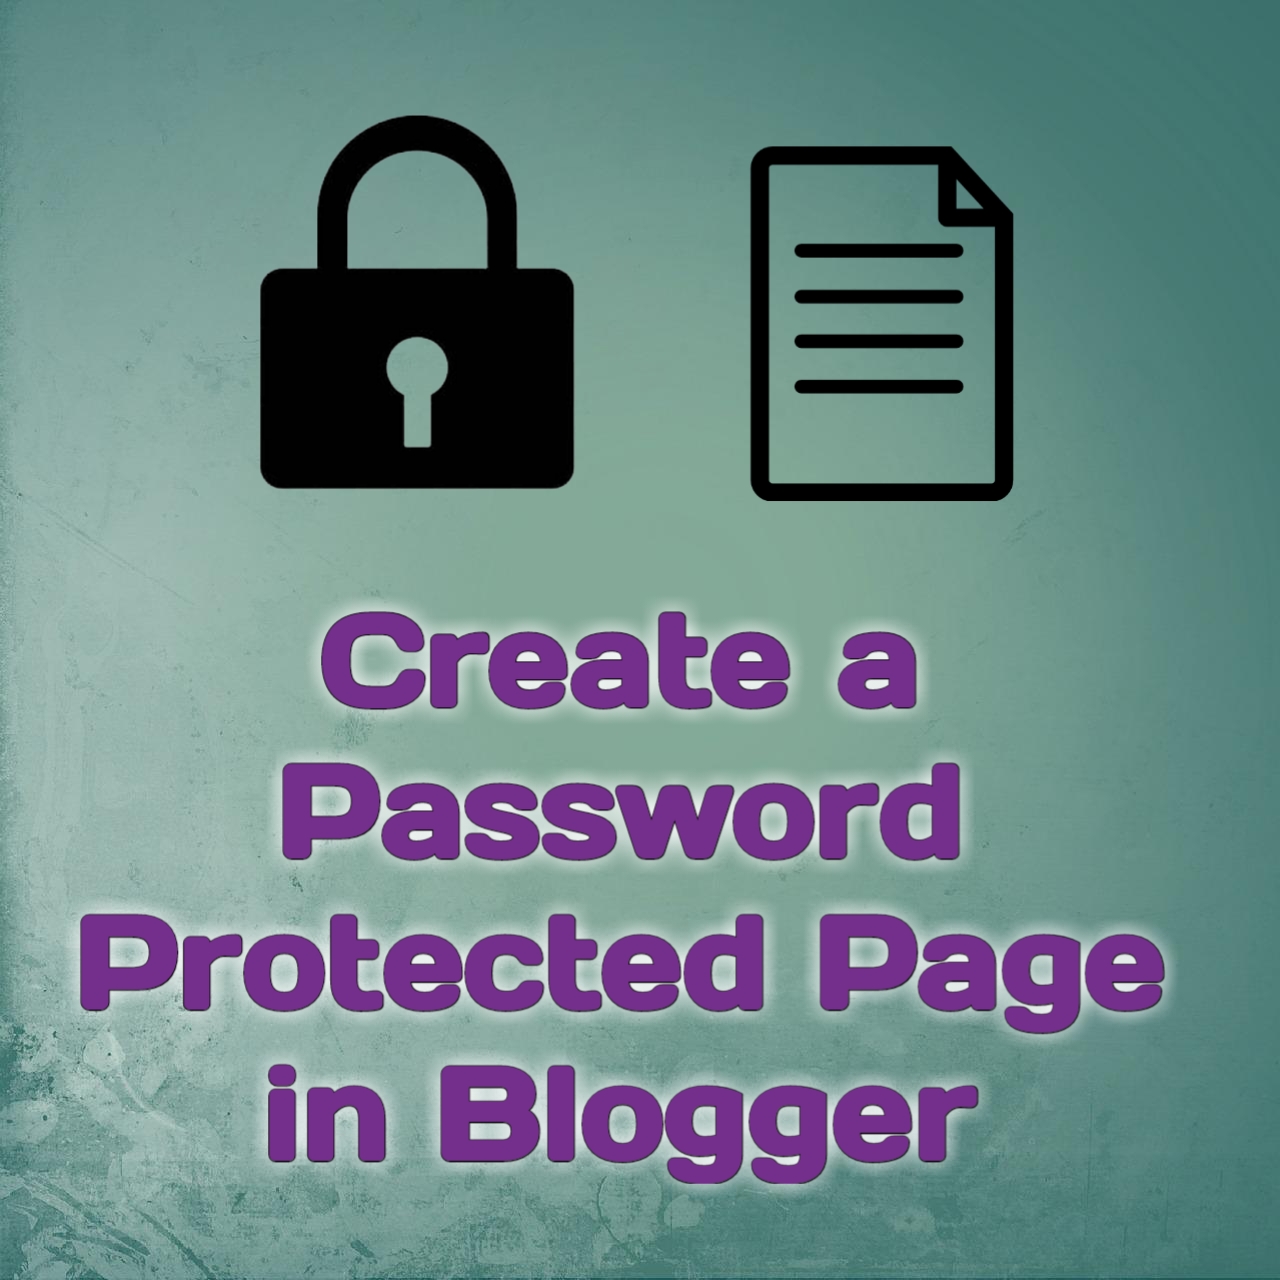 How to Create a Password Protected Page in Blogger? Complete Tutorial